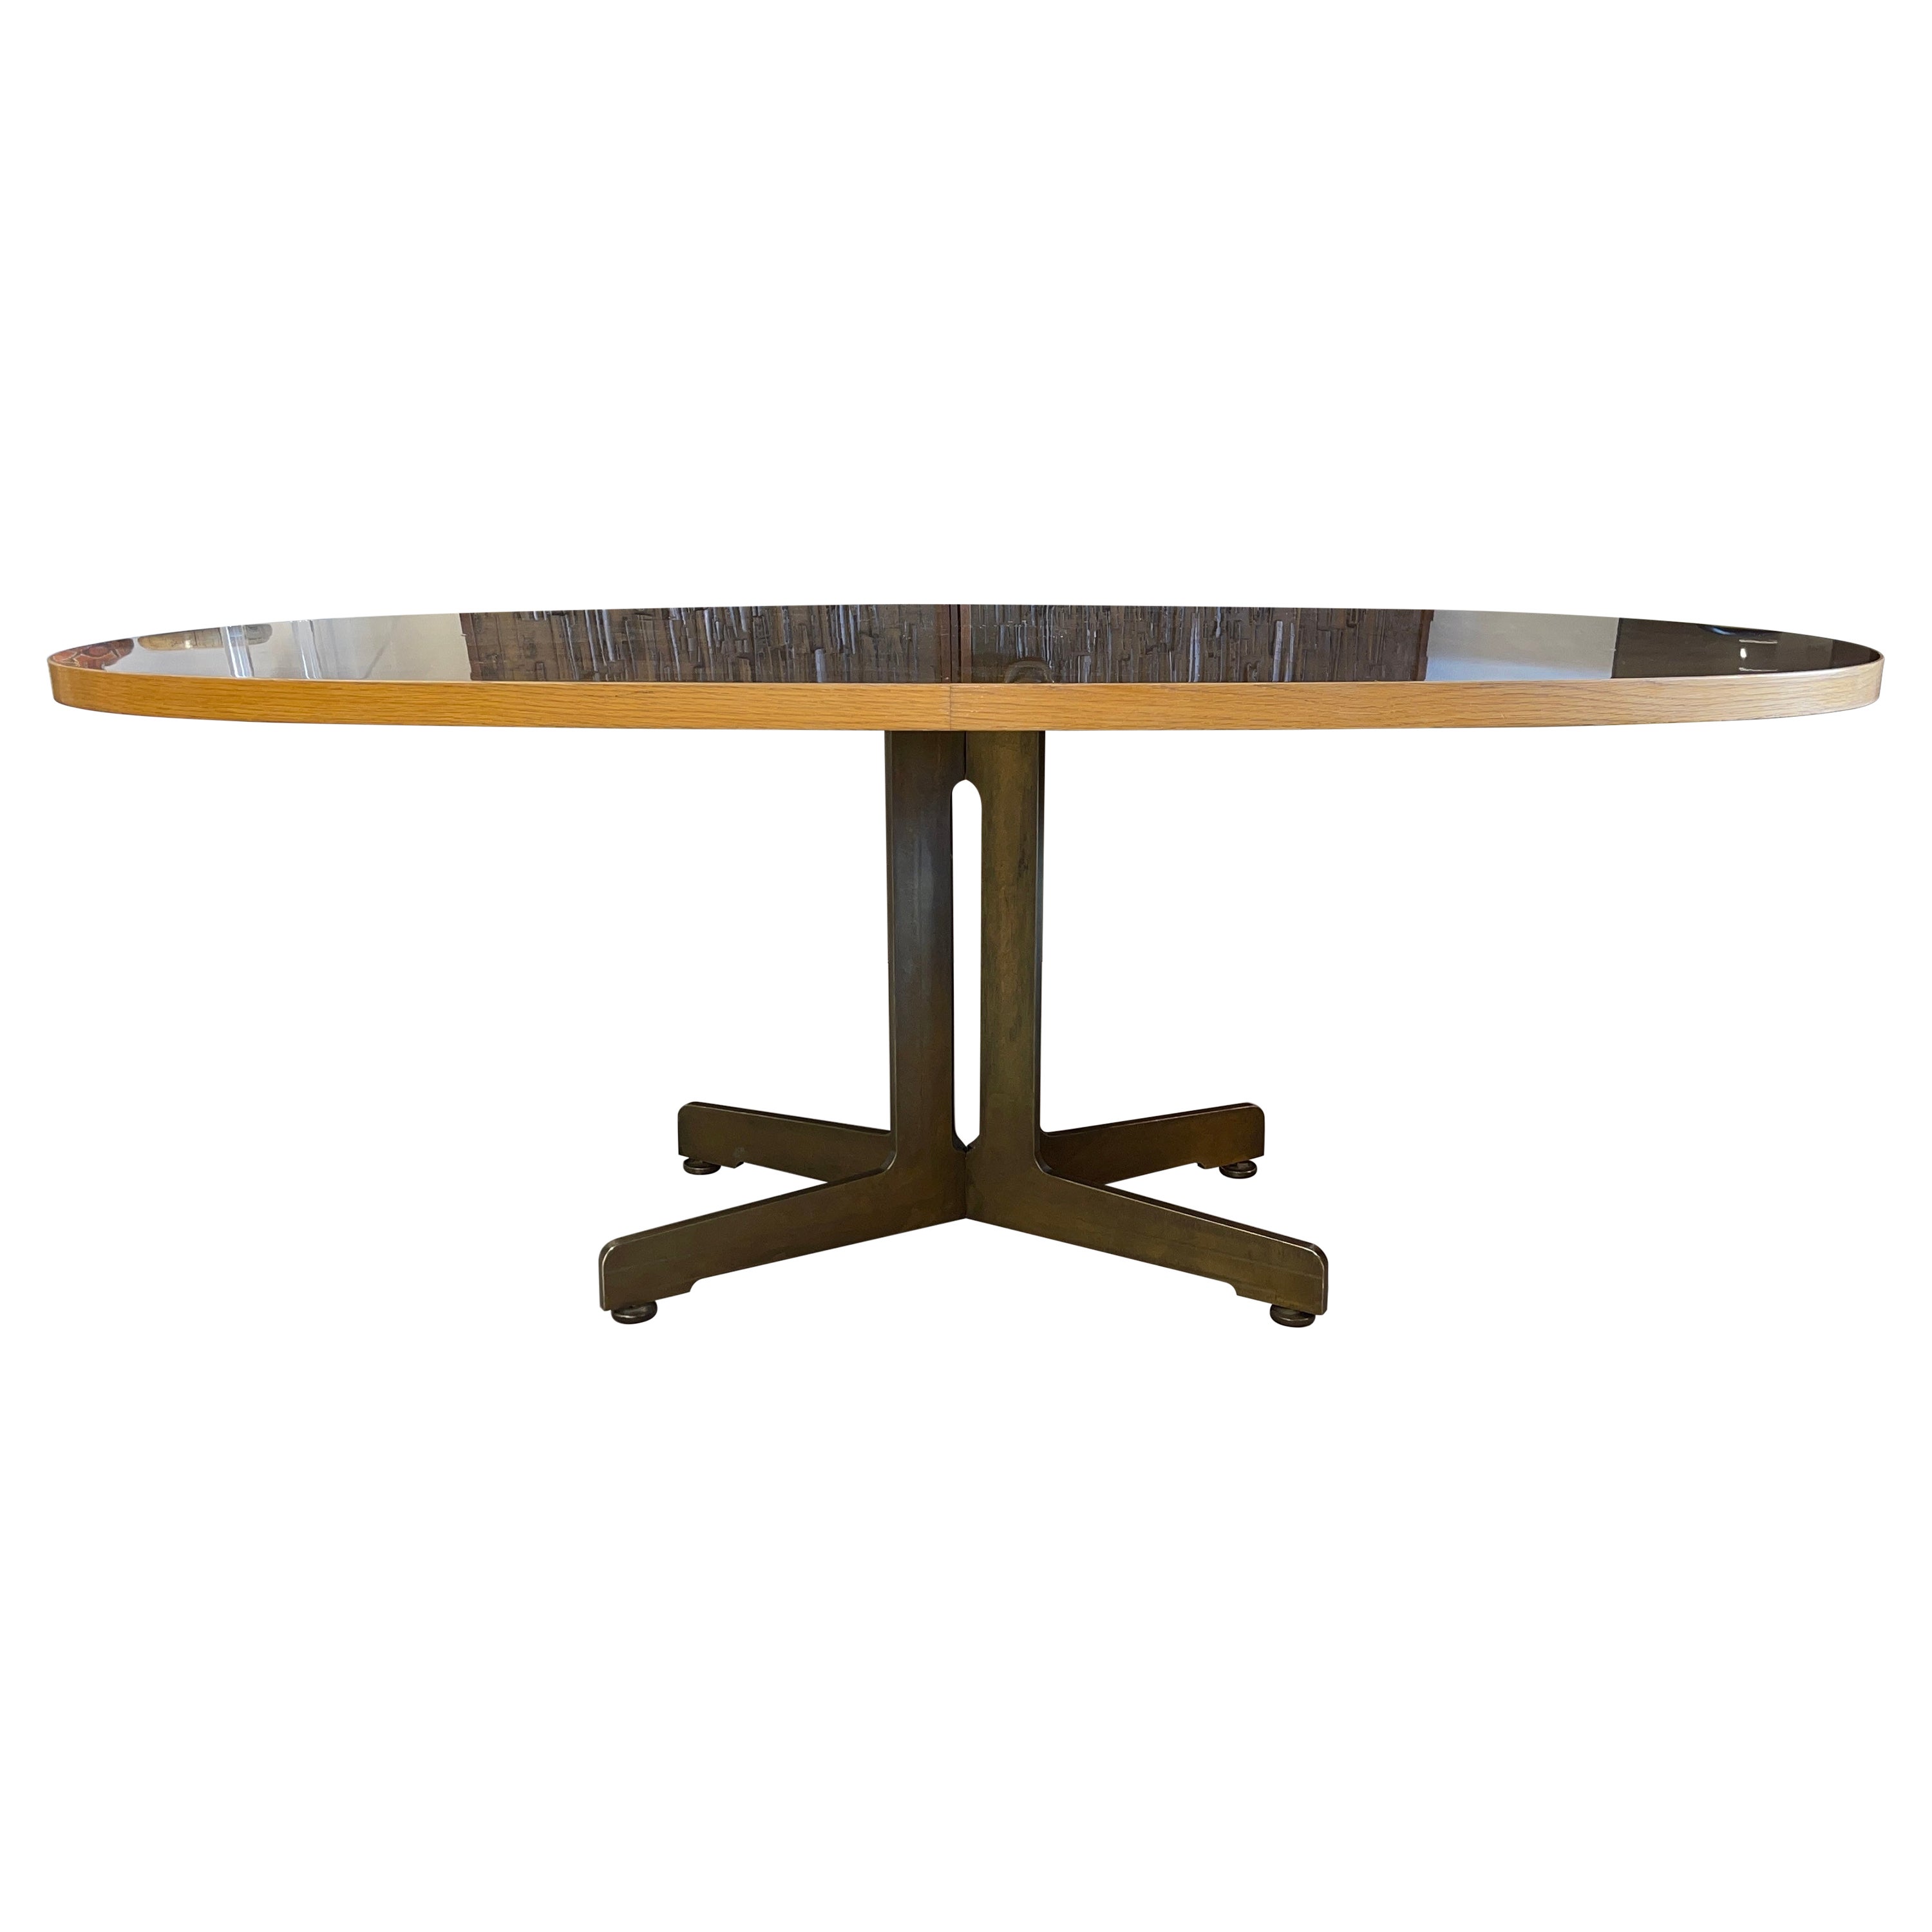 1970’s Harry Lunstead Design Copper and Iron Dining Table